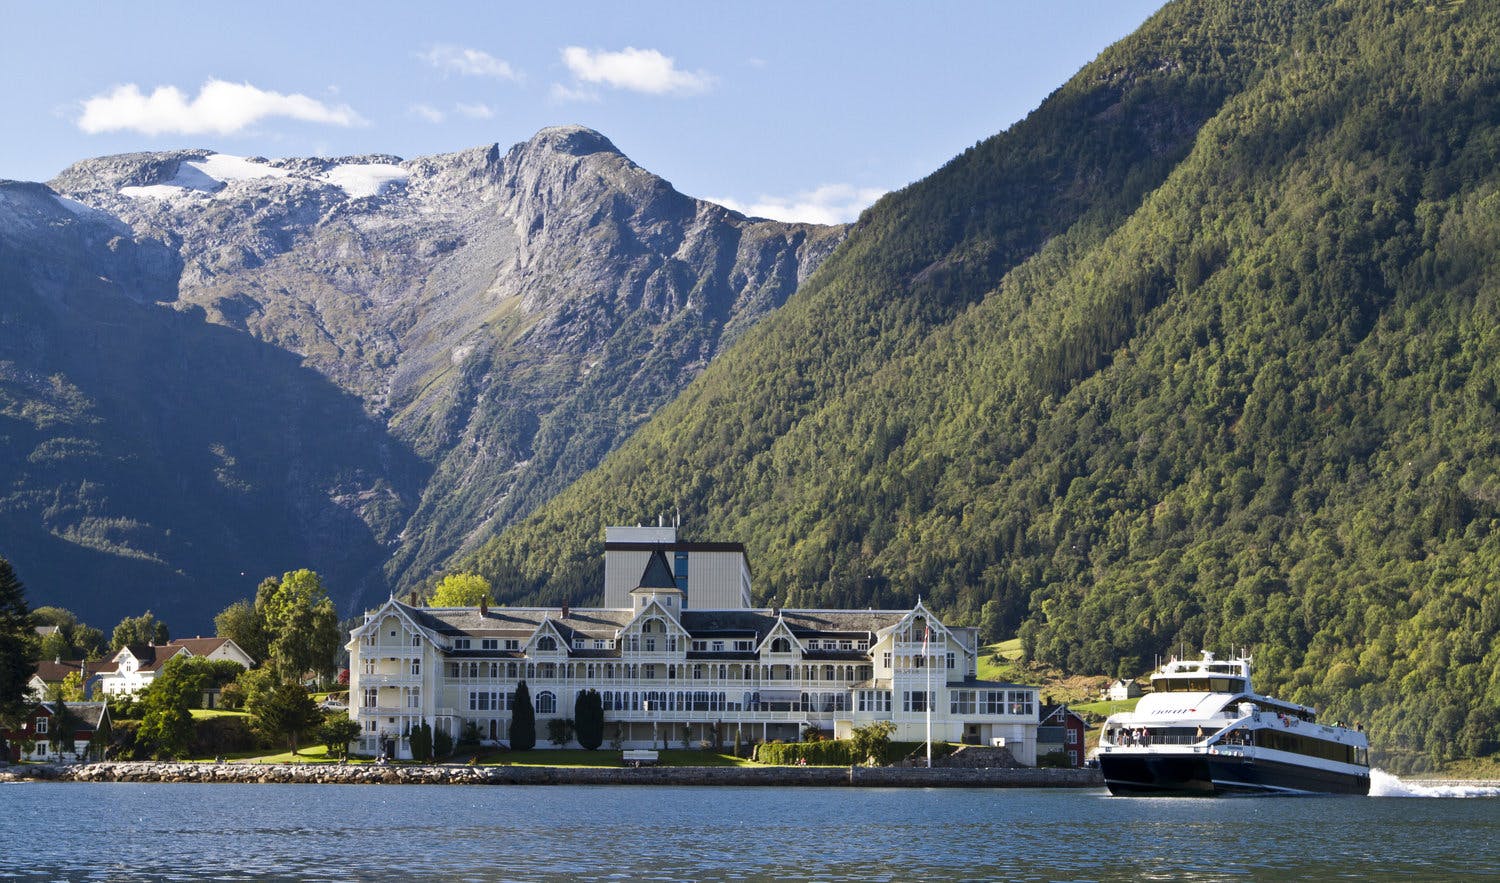 Guided day-tour to Sognefjorden and Flåm with a Sognefjord Cruise and Flåm railway